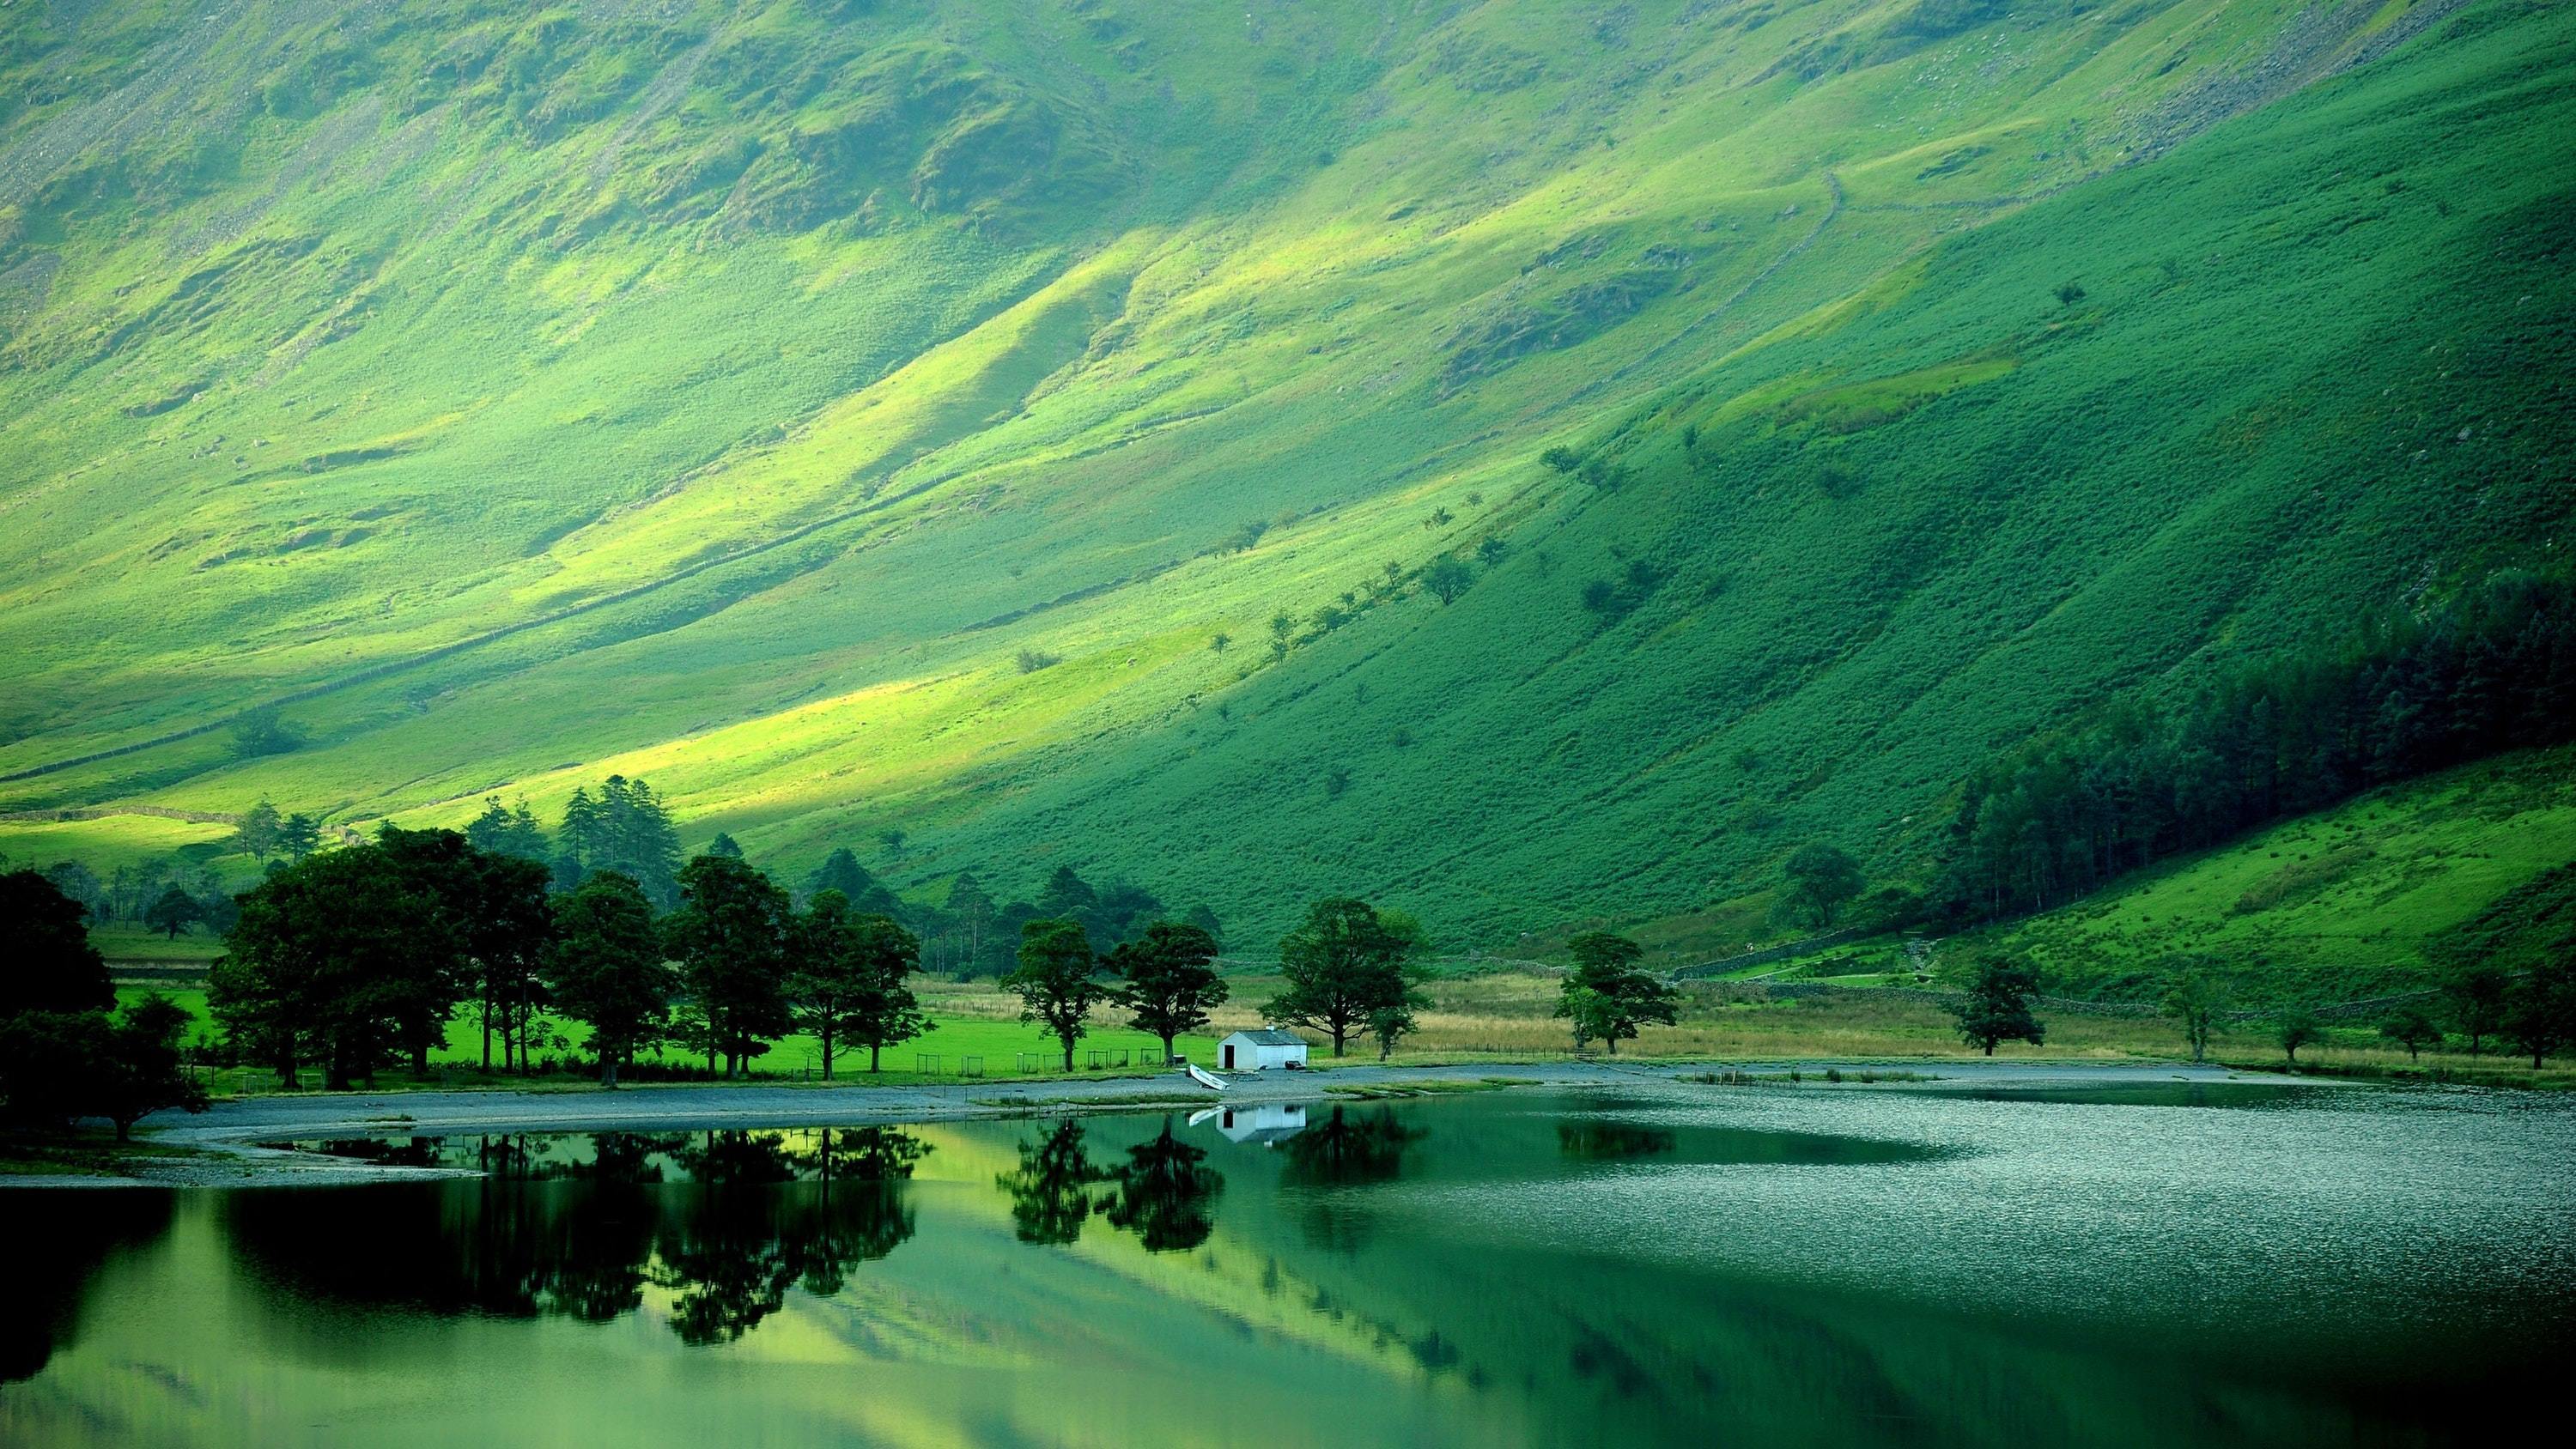 Early autumn reflections in Buttermere (Owen Humphreys/PA)